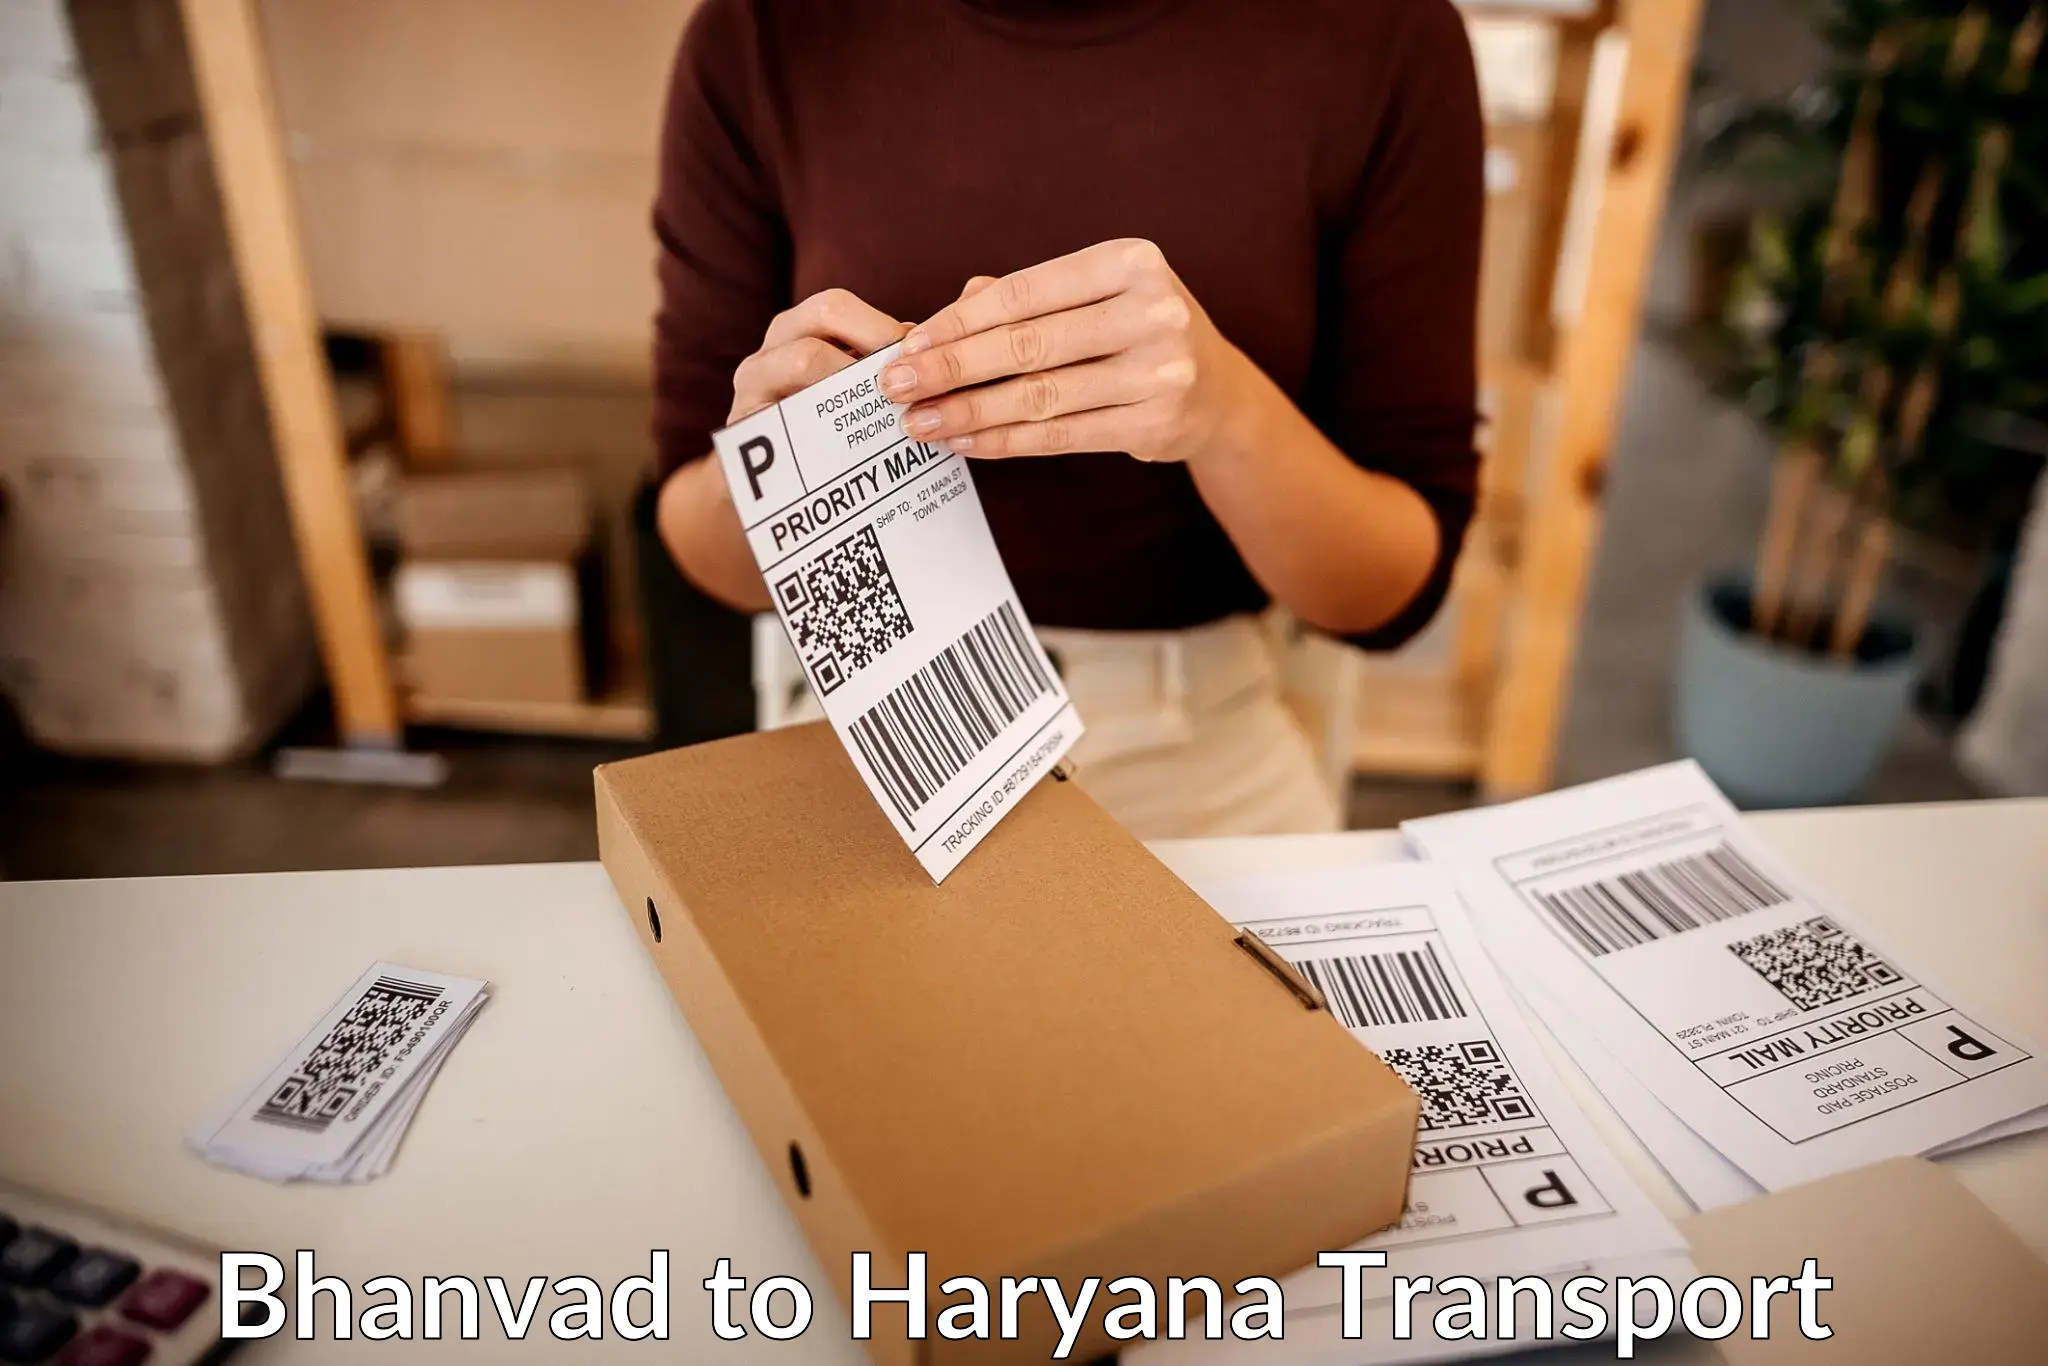 Delivery service Bhanvad to Sirsa